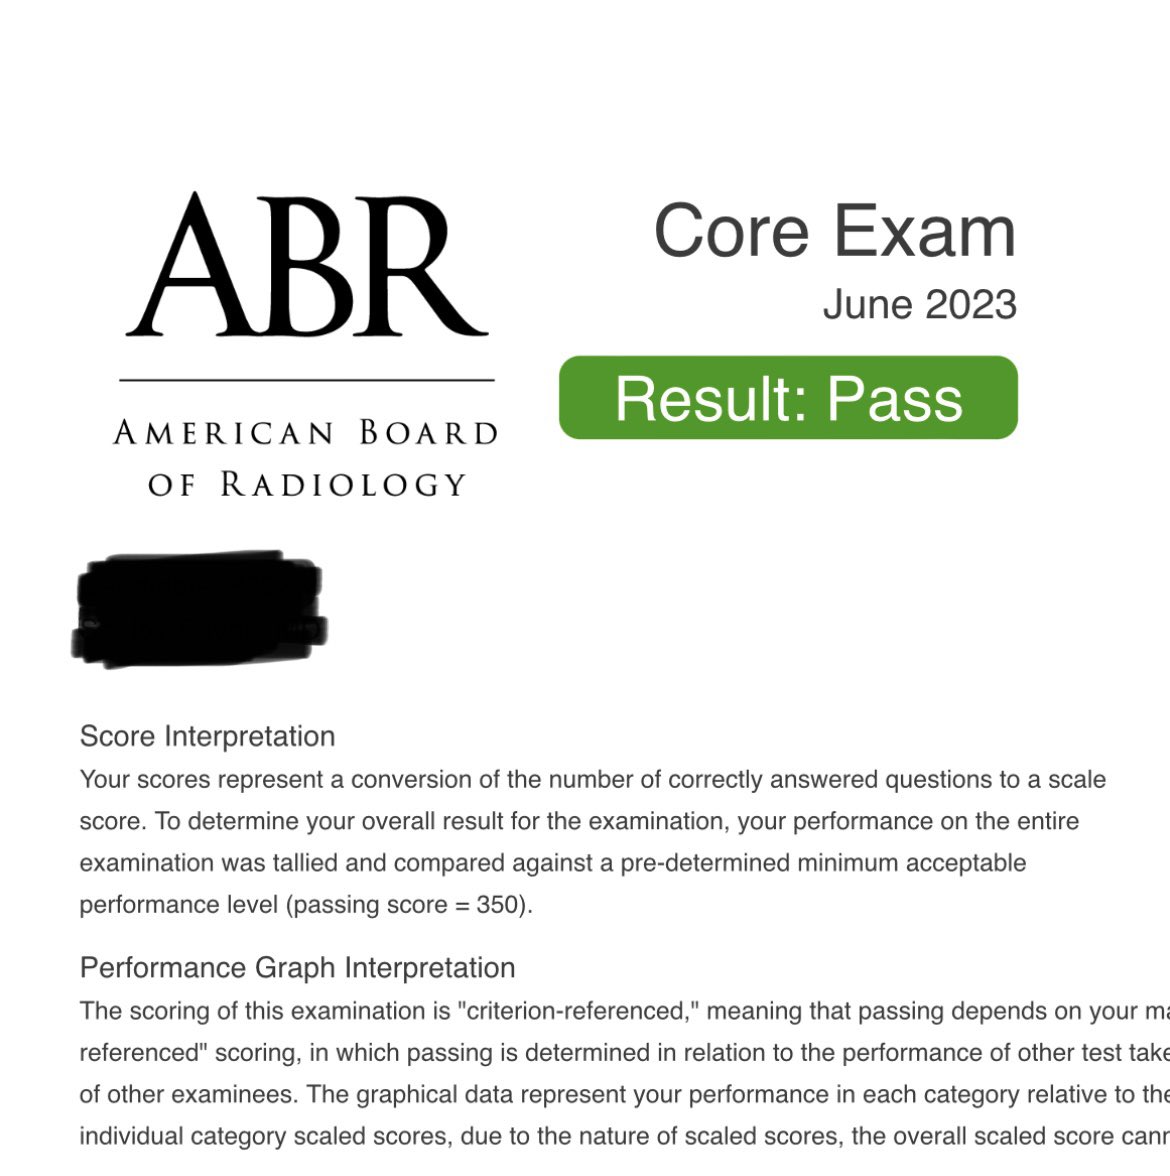 Congrats to our R4 class for passing the ABR Core exam! We are so proud of you and all of your hard work!